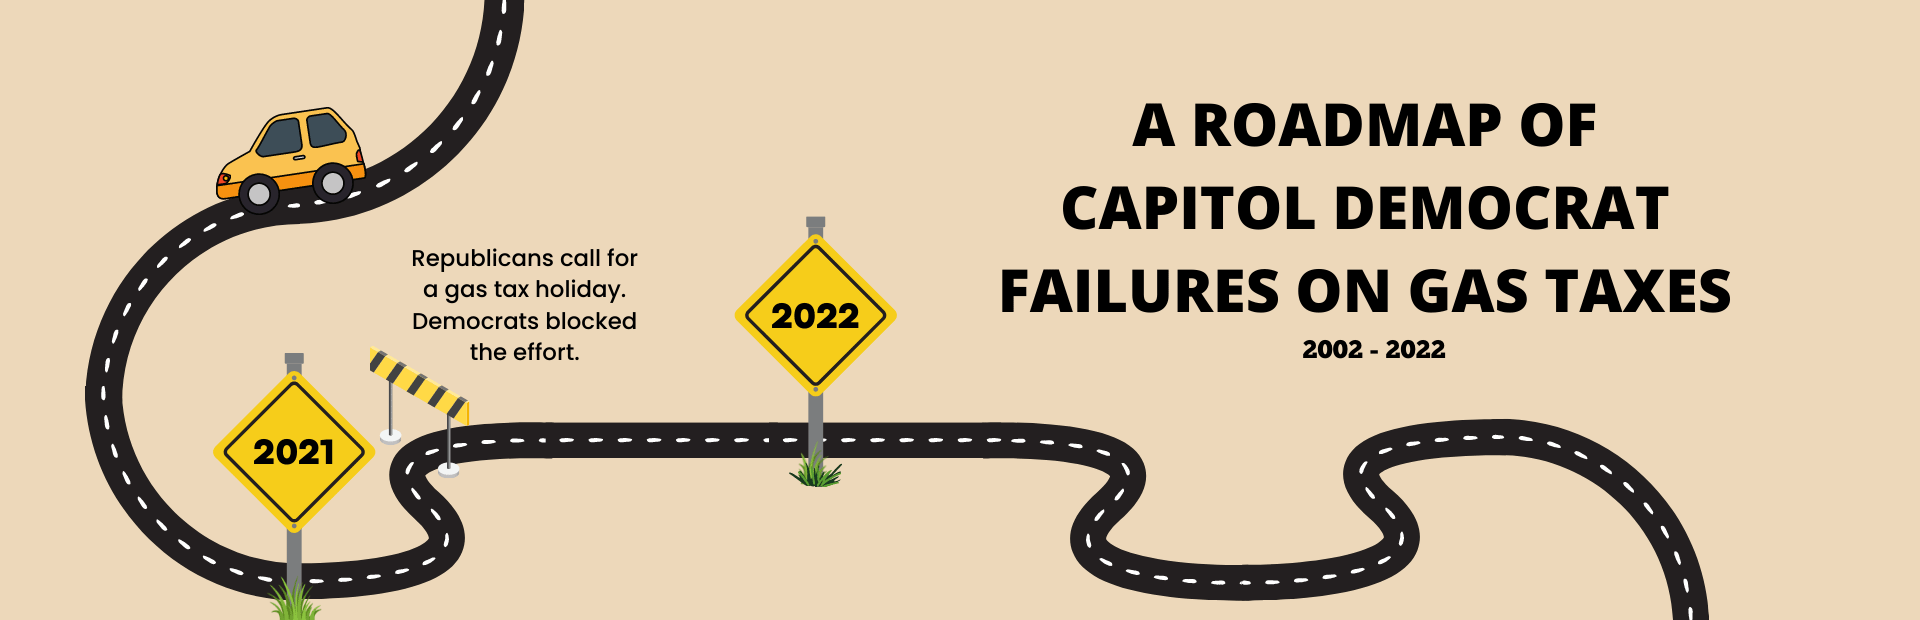 A Roadmap of Capitol Democrat Failures on Gas Taxes